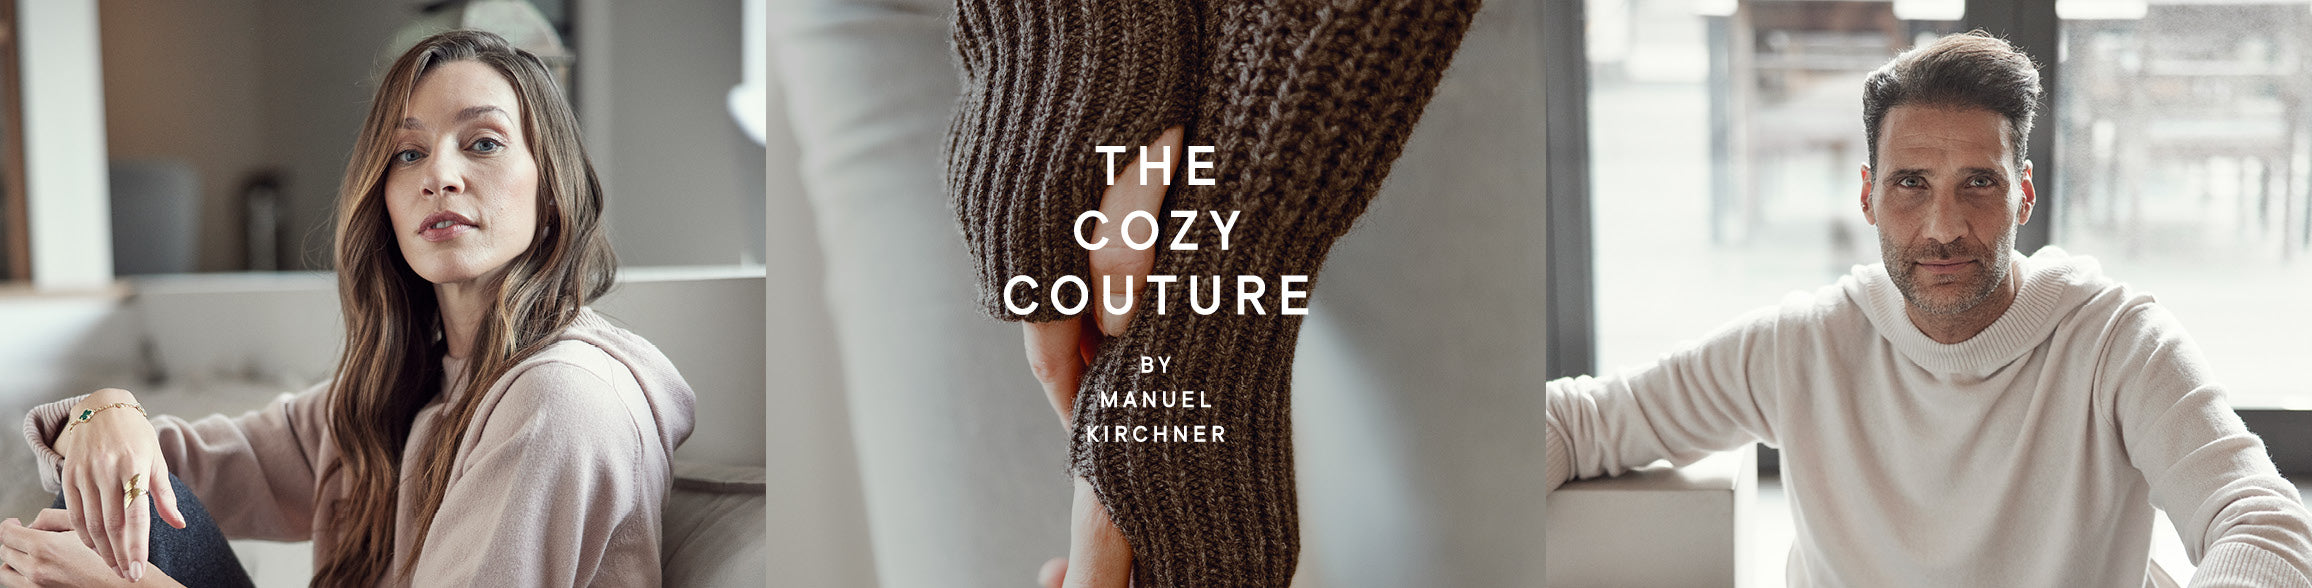 THE COZY COUTURE